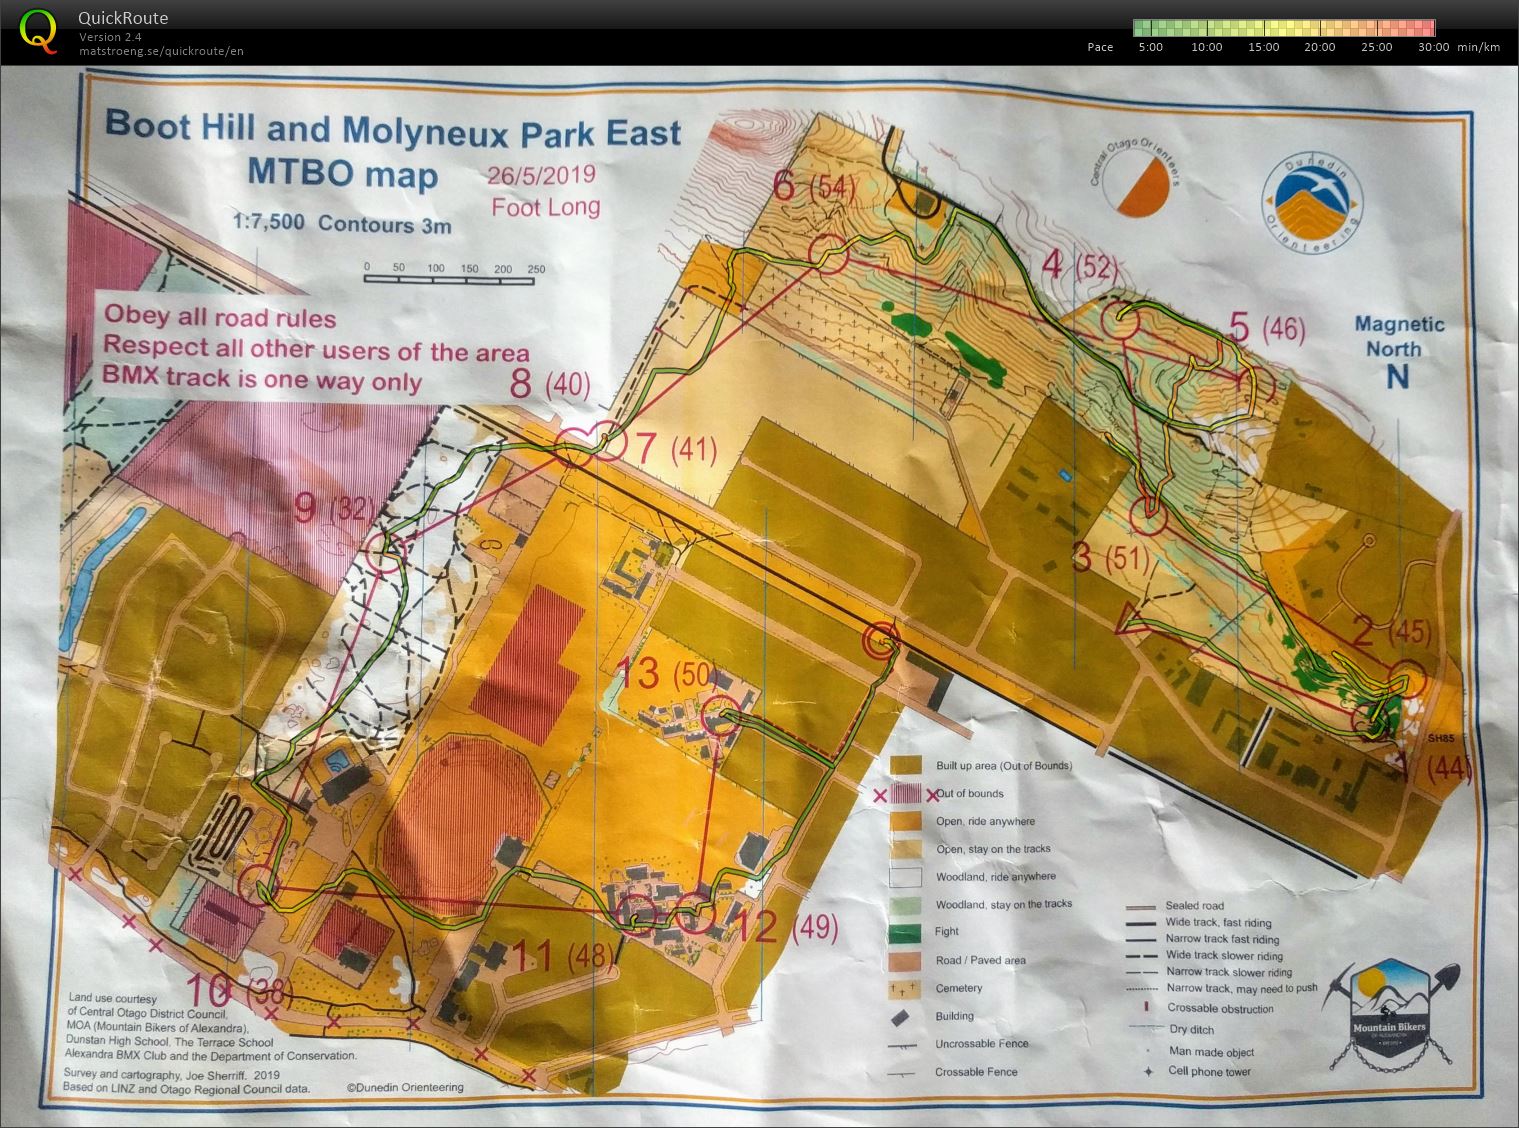 Boot Hill and Molyneux Park East MTBO - Foot Long (26/05/2019)